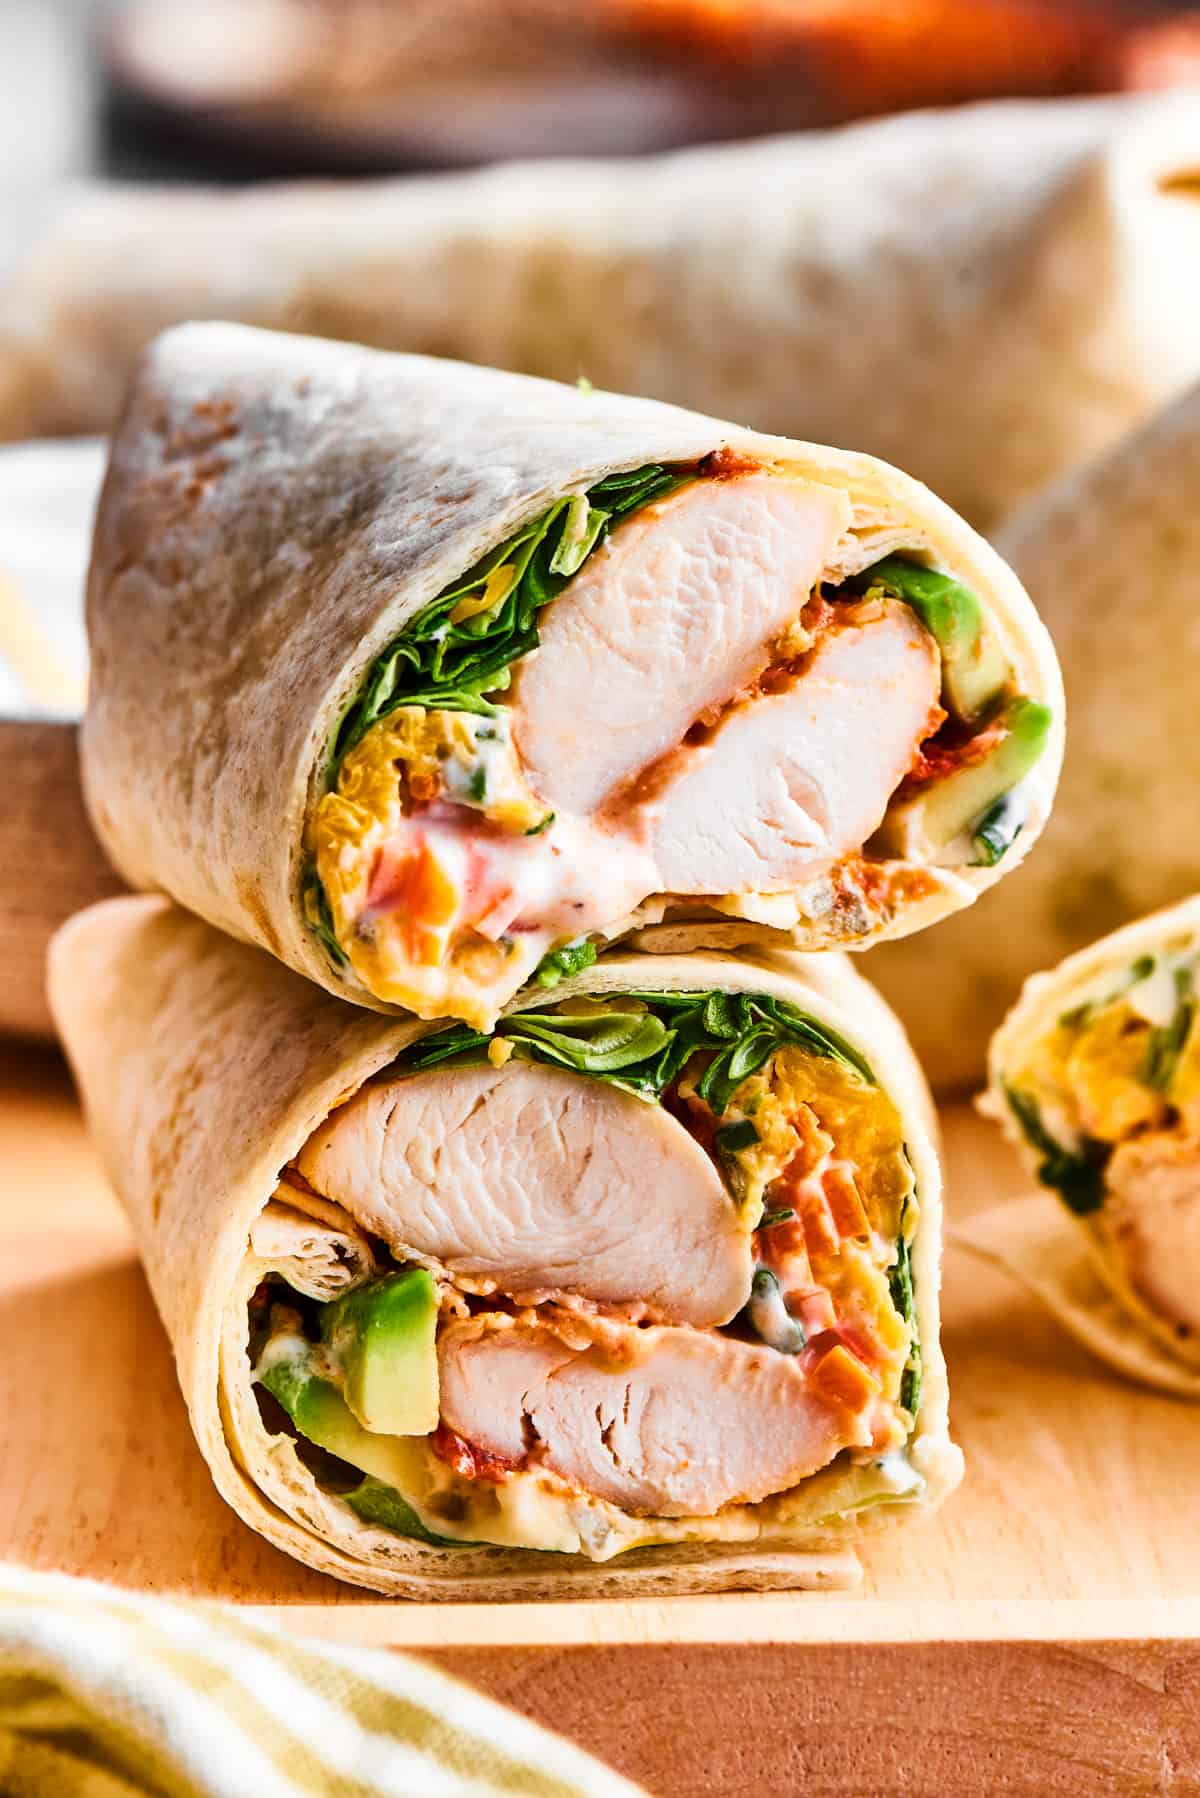 A cut buffalo chicken wrap shows the interior of chicken and vegetables.